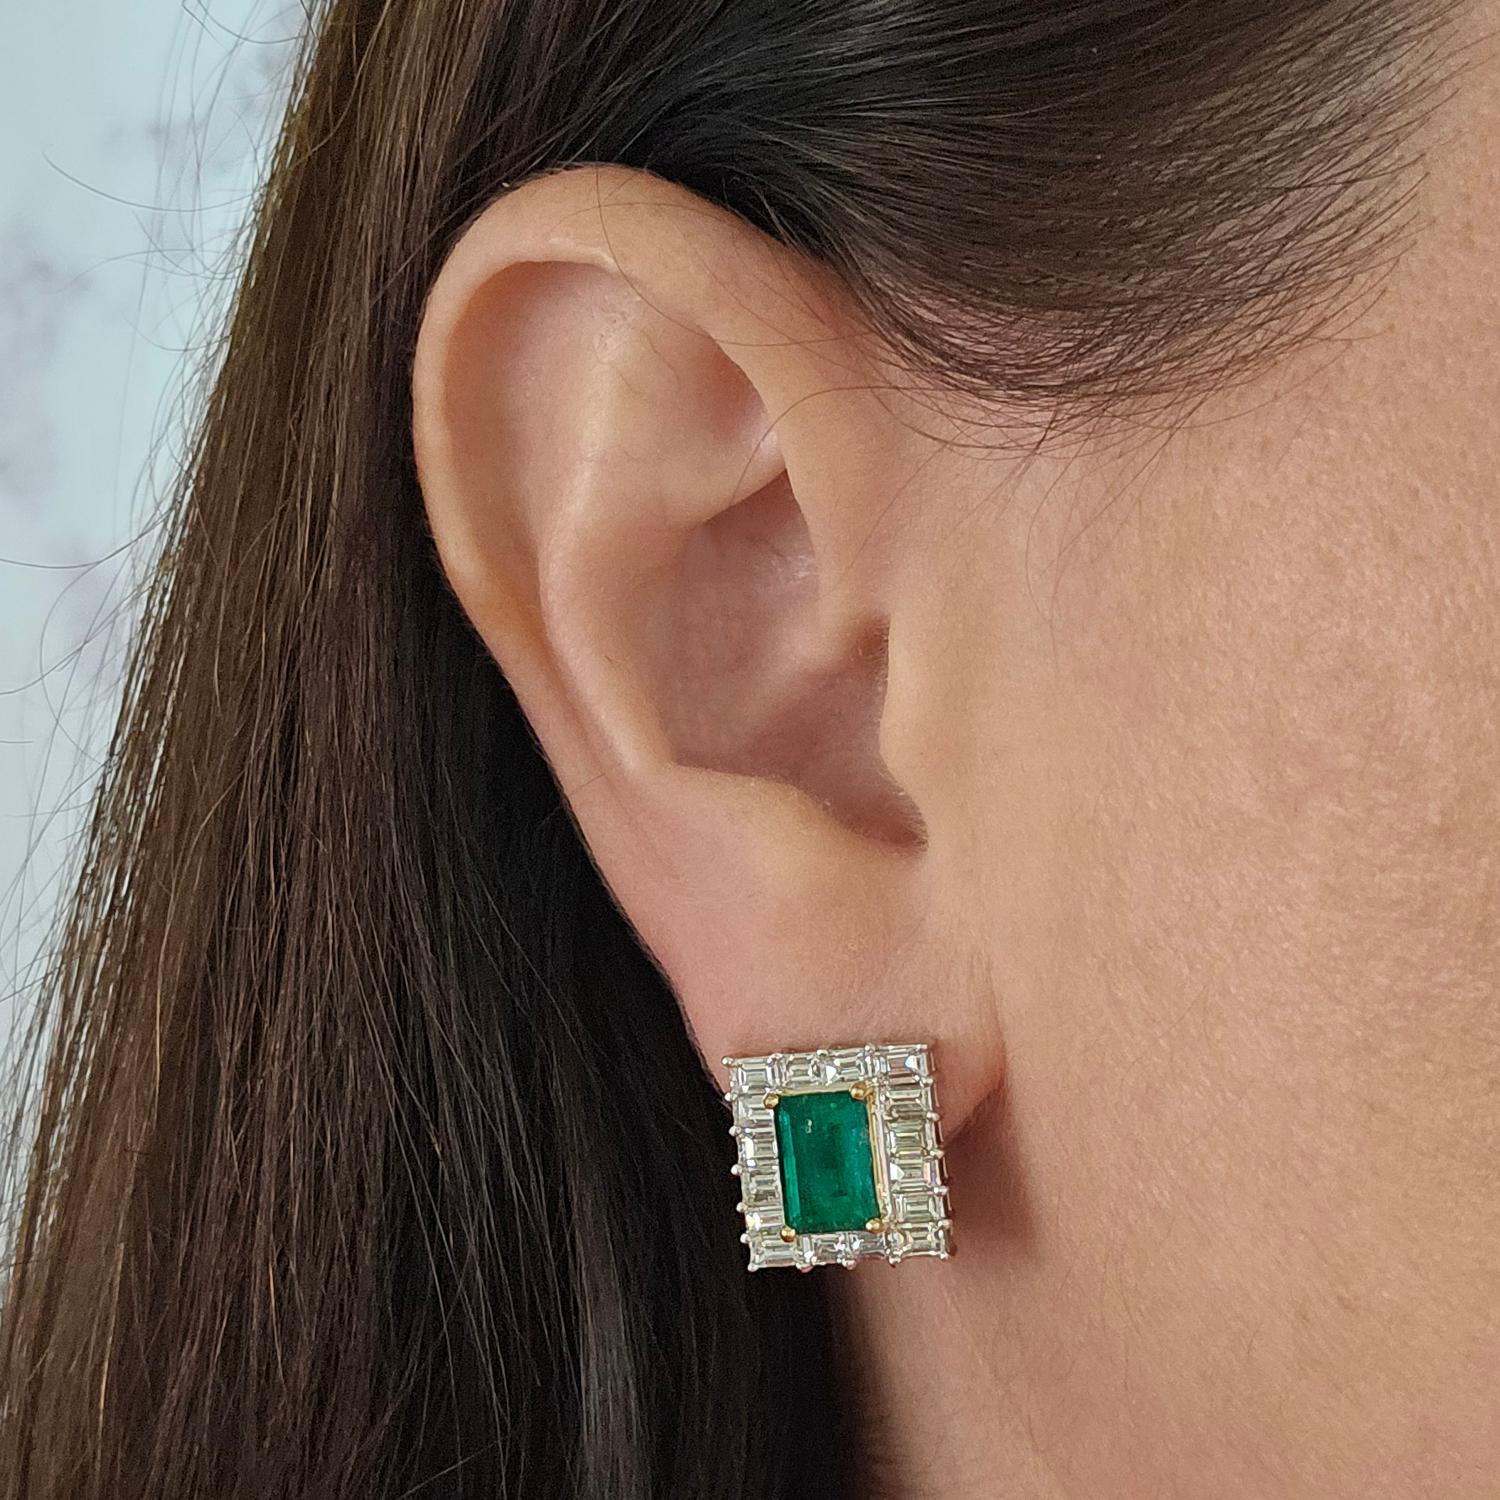 18 Karat White and Yellow Gold Earrings Featuring 2 Elongated Emeralds Totaling 3.30 Carats Surrounded by 32 Baguette Cut Diamonds of SI Clarity and H Color Totaling Approximately 3.00 Carats. Pierced Post with Omega Clip Back. Post Removed Upon